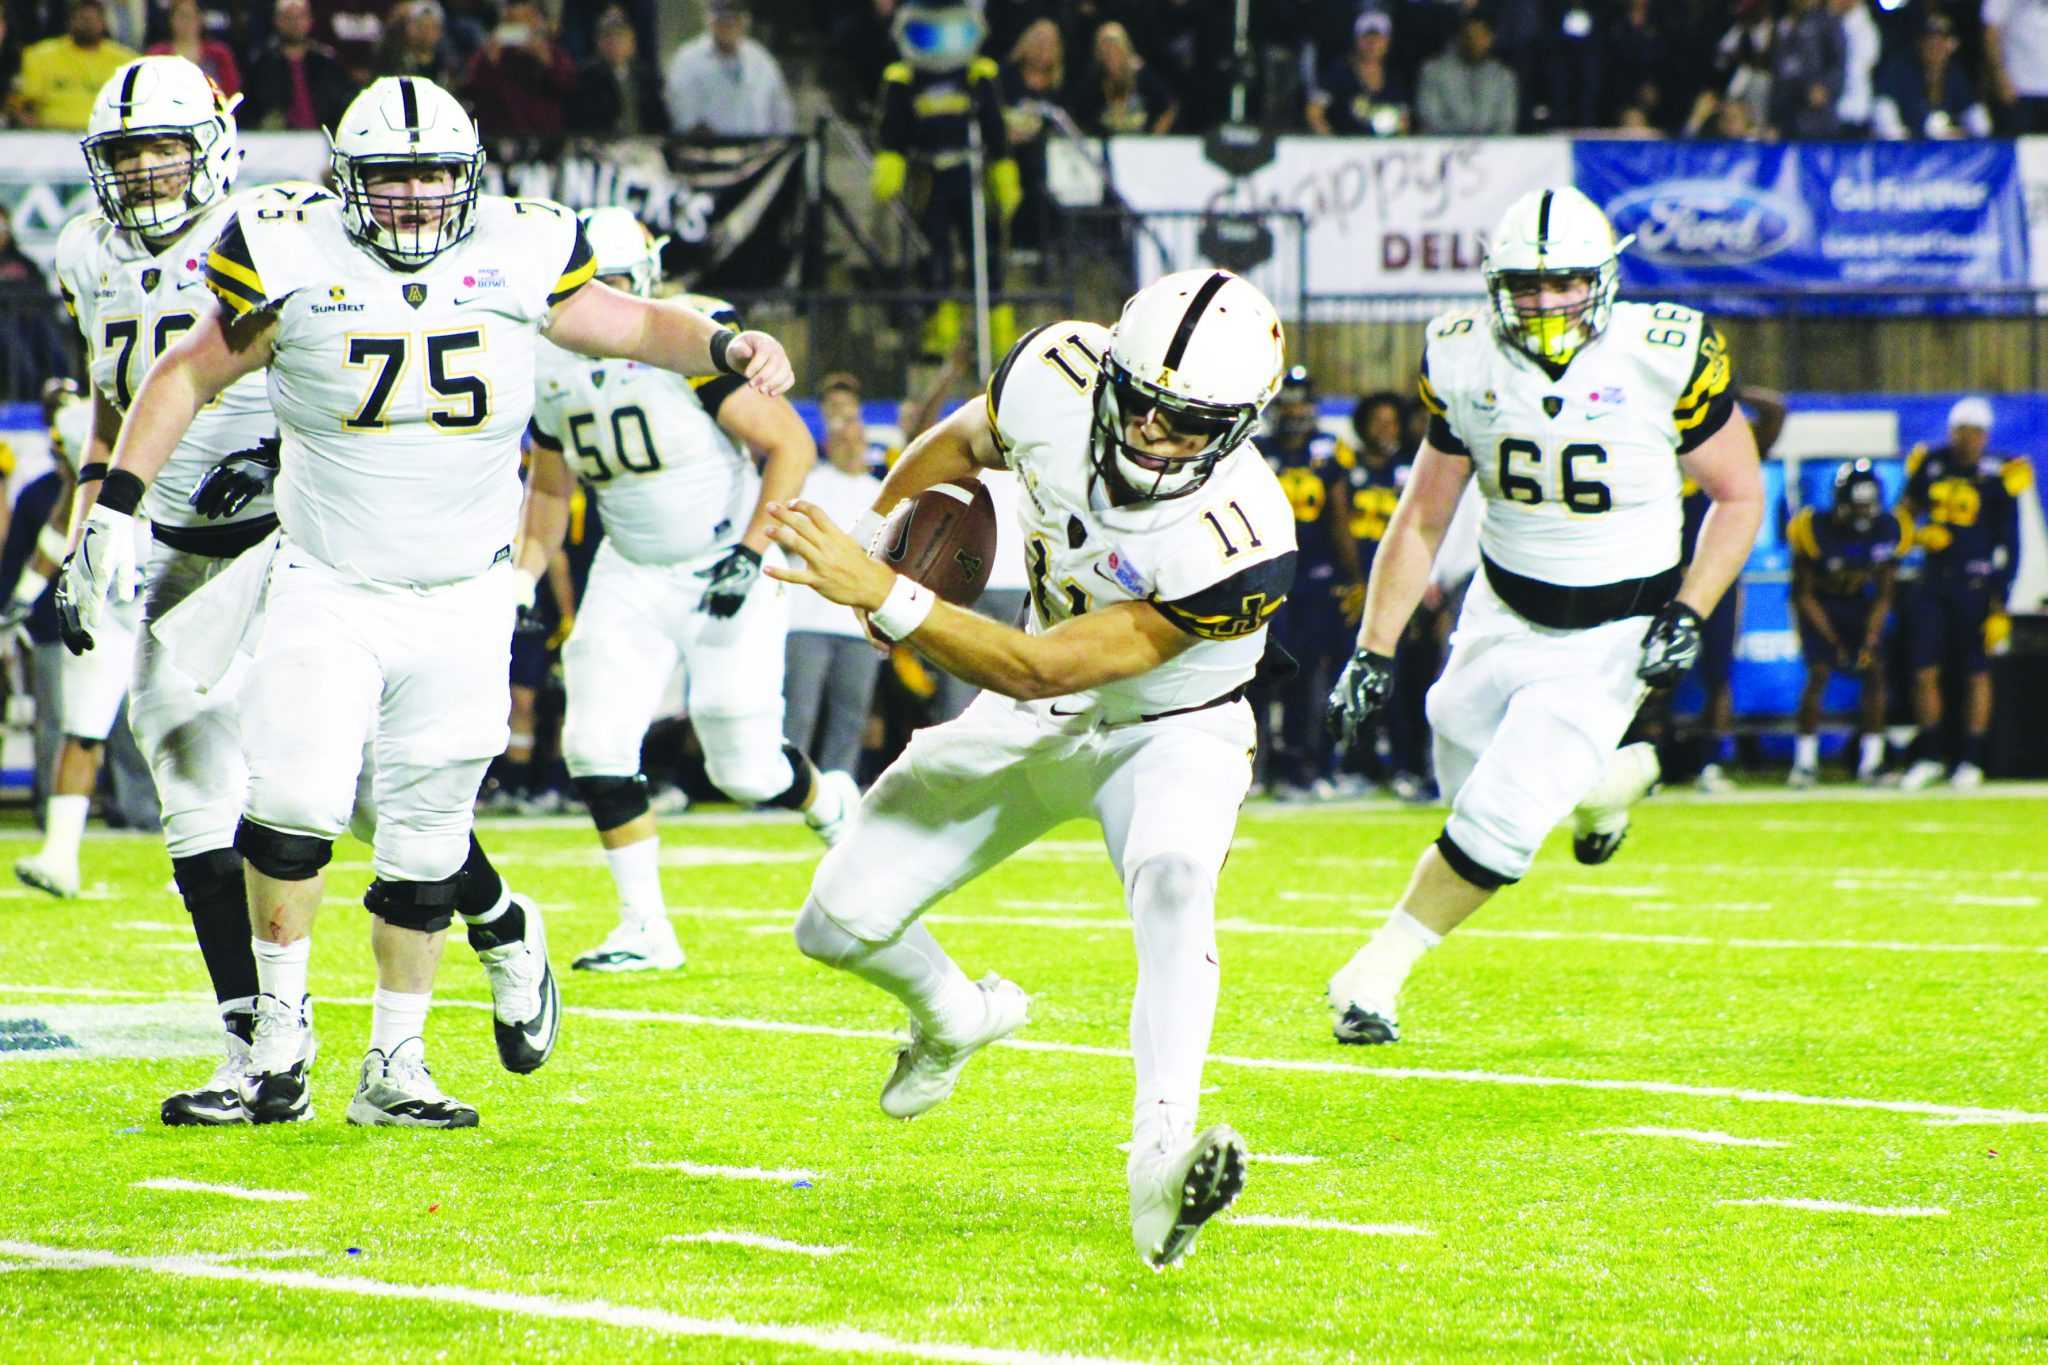 Junior Quarterback, Taylor Lamb, runs the ball down the field during the Camellia Bowl game against Toledo in Montgomery, Alabama. The Mountaineers won the game with the score being 31-28.